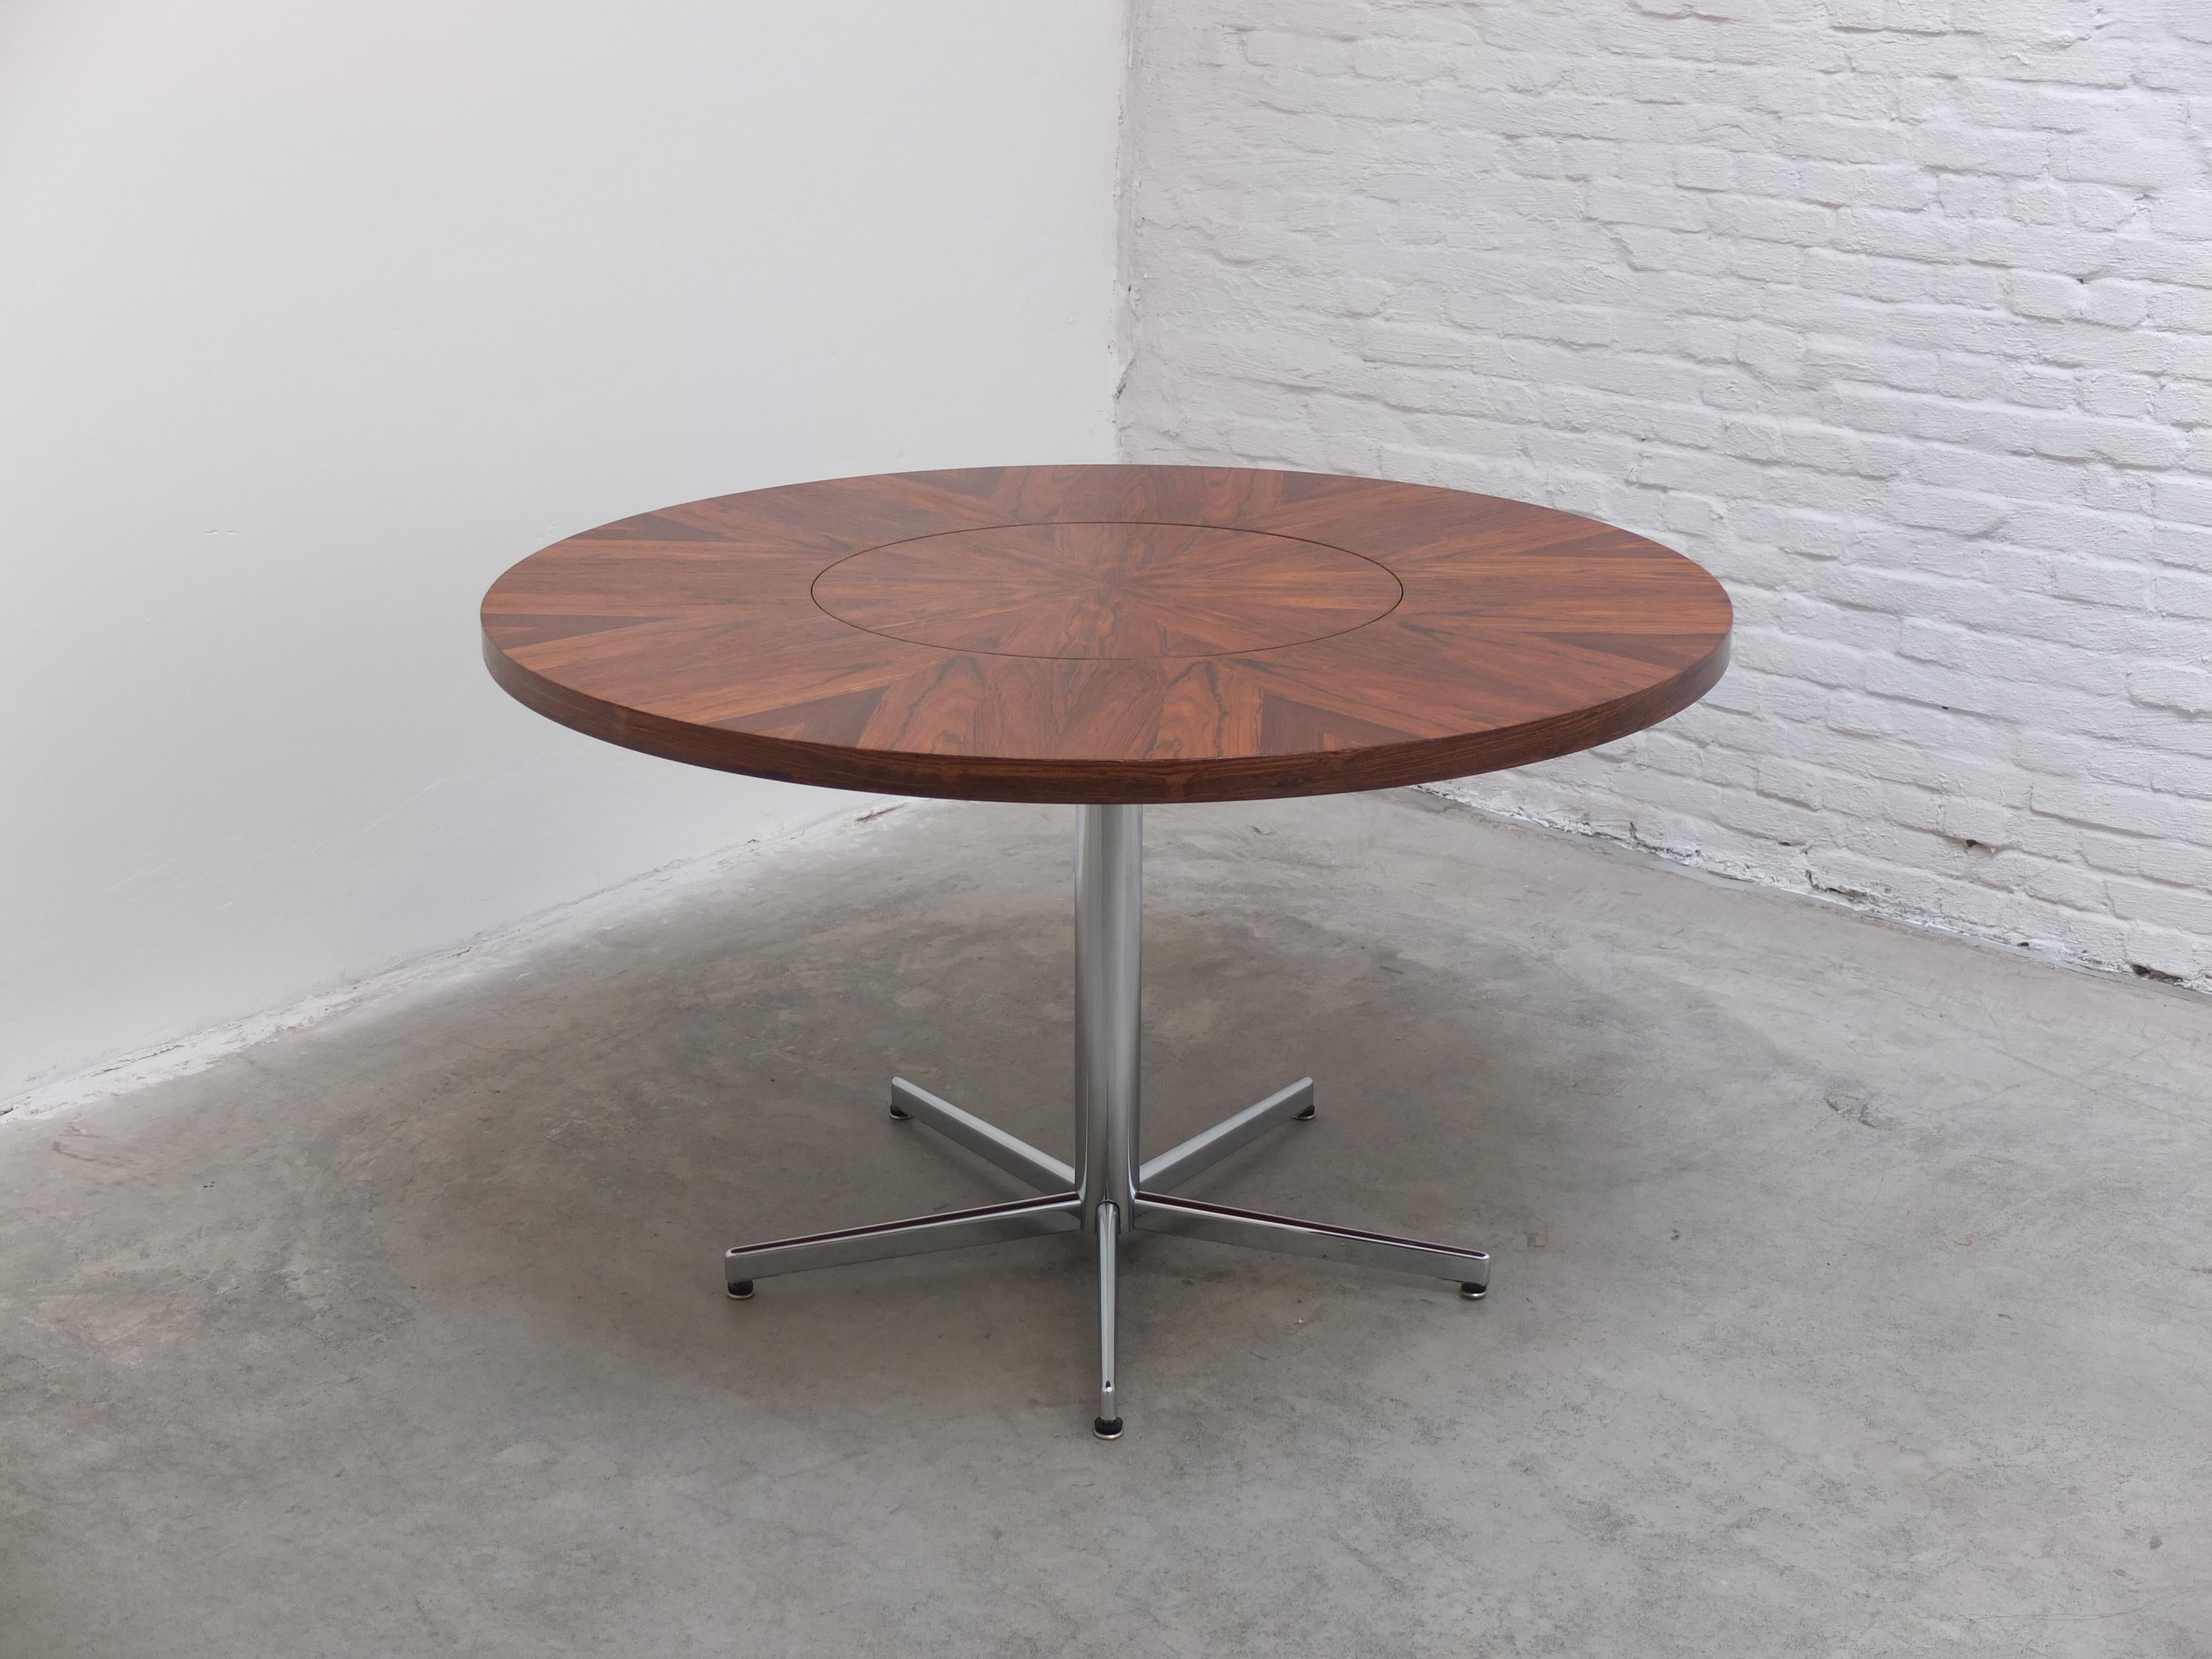 Fantastic round table produced by Emü in Germany during the 1960s. The top is made of Rosewood with a very decorative woodgrain and also features a rotating center. Beneath we find a beautiful chromed steel 5-star pedestal base which adds a